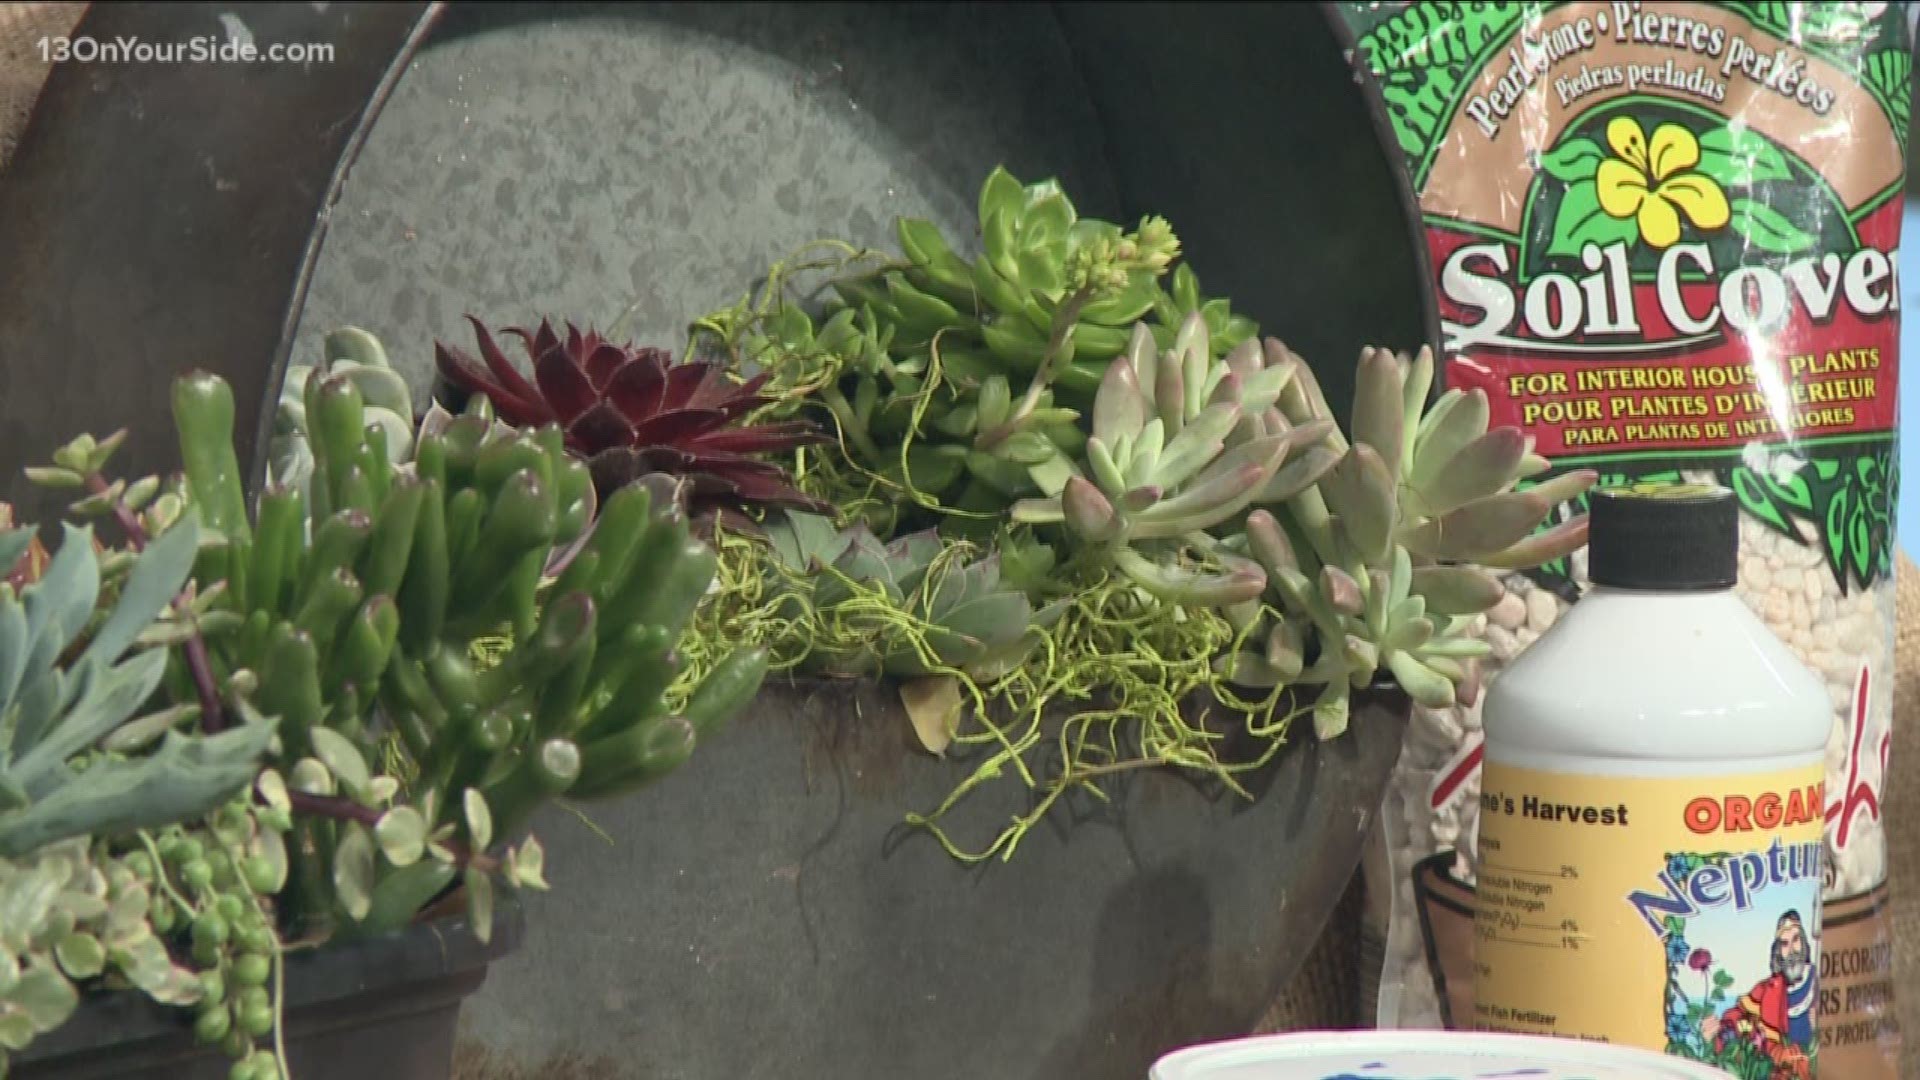 Succulents are a great way to add to your home and with so many different kinds to choose from, you can create masterpieces of color and texture. Bill Bird from Jonker's Garden shared some tips with us on how to make sure your succulents thrive.